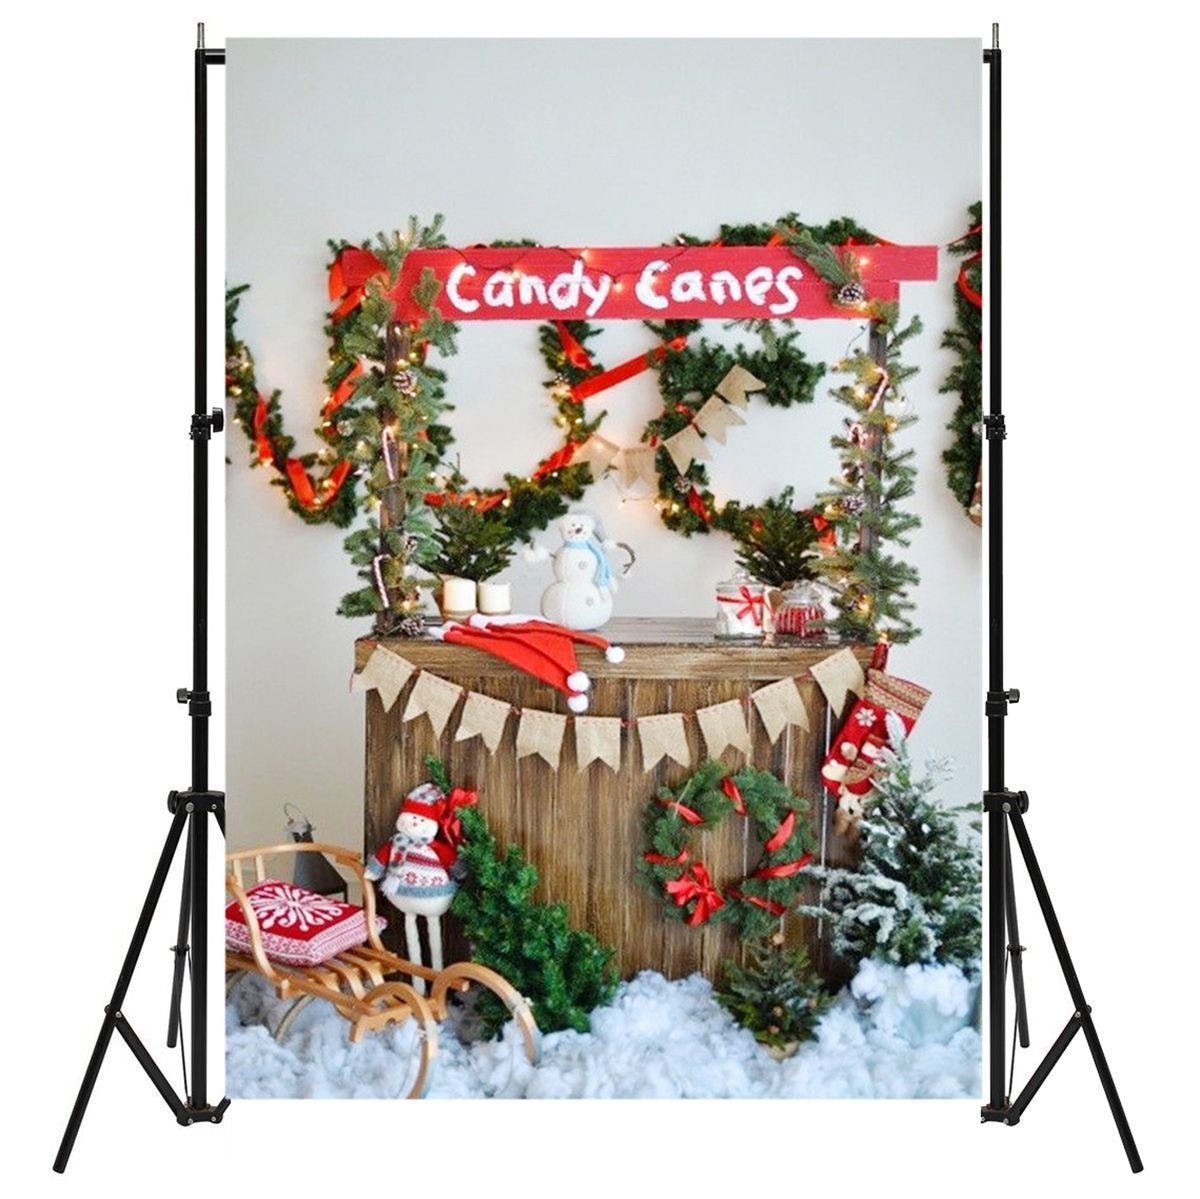 5x7FT-Christmas-Tree-Snow-Lights-Flags-Canned-Candy-Photography-Backdrop-Studio-Prop-Background-1392177